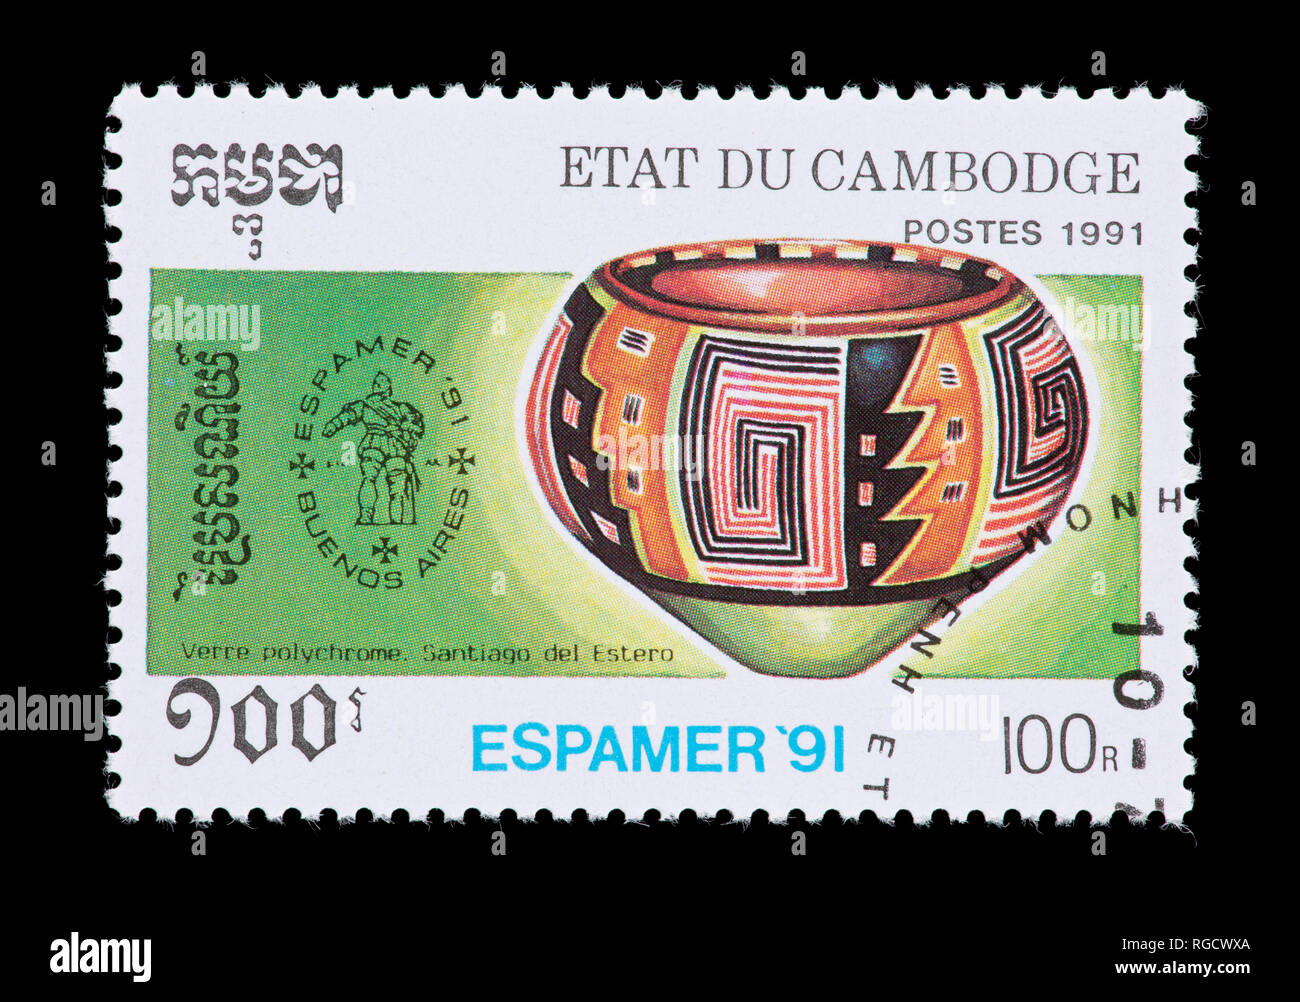 Postage stamp from Cambodia depicting a pre-Columbian Santiago del Estero pottery example. Stock Photo